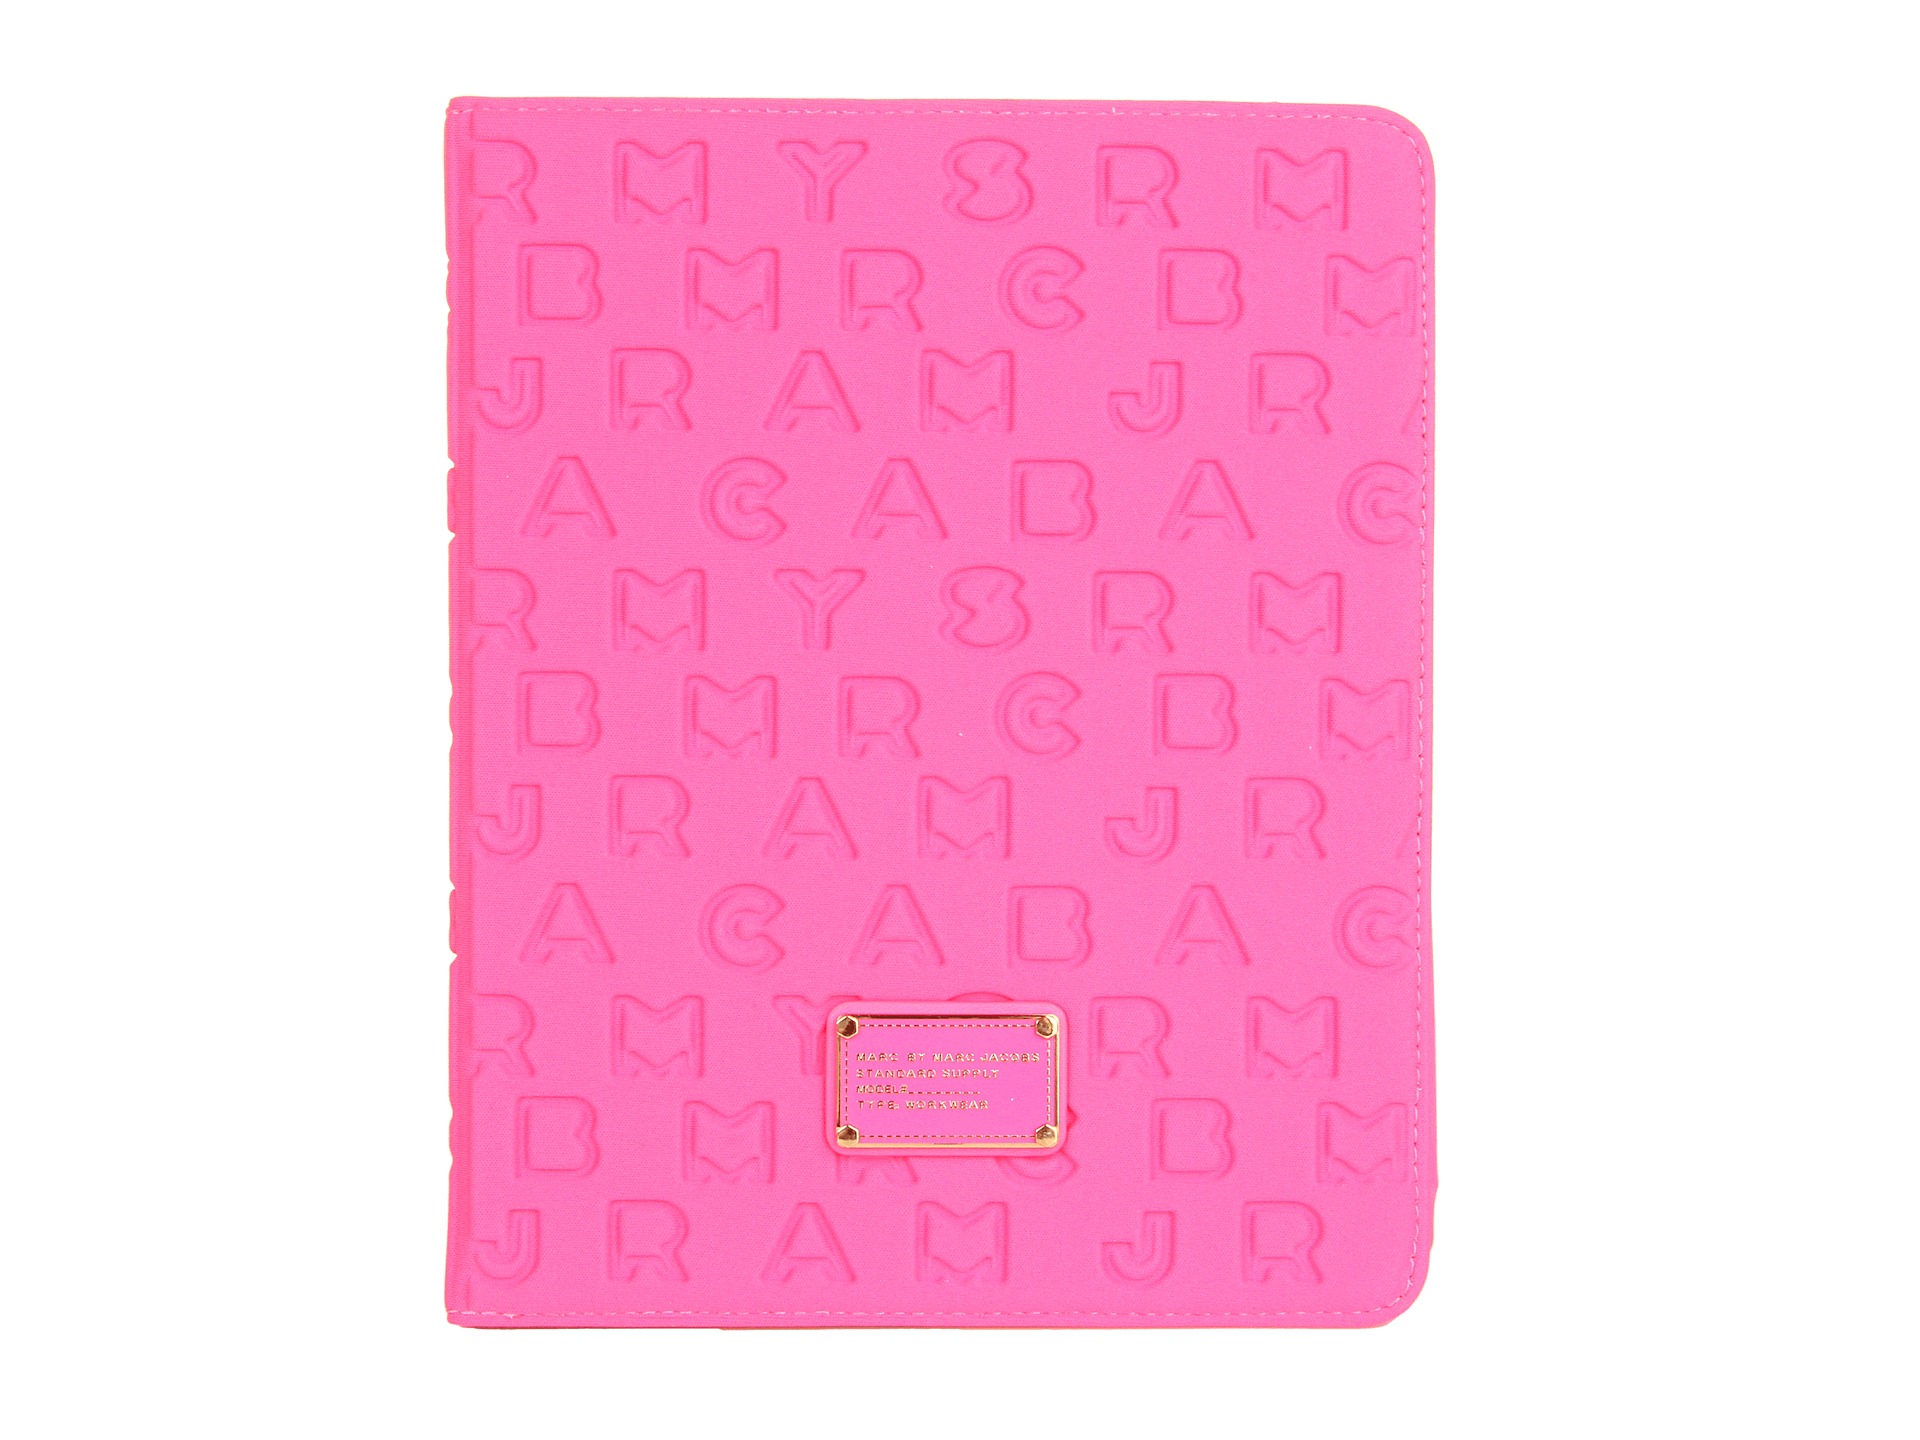 marc by marc jacobs logo cartridge tablet book $ 98